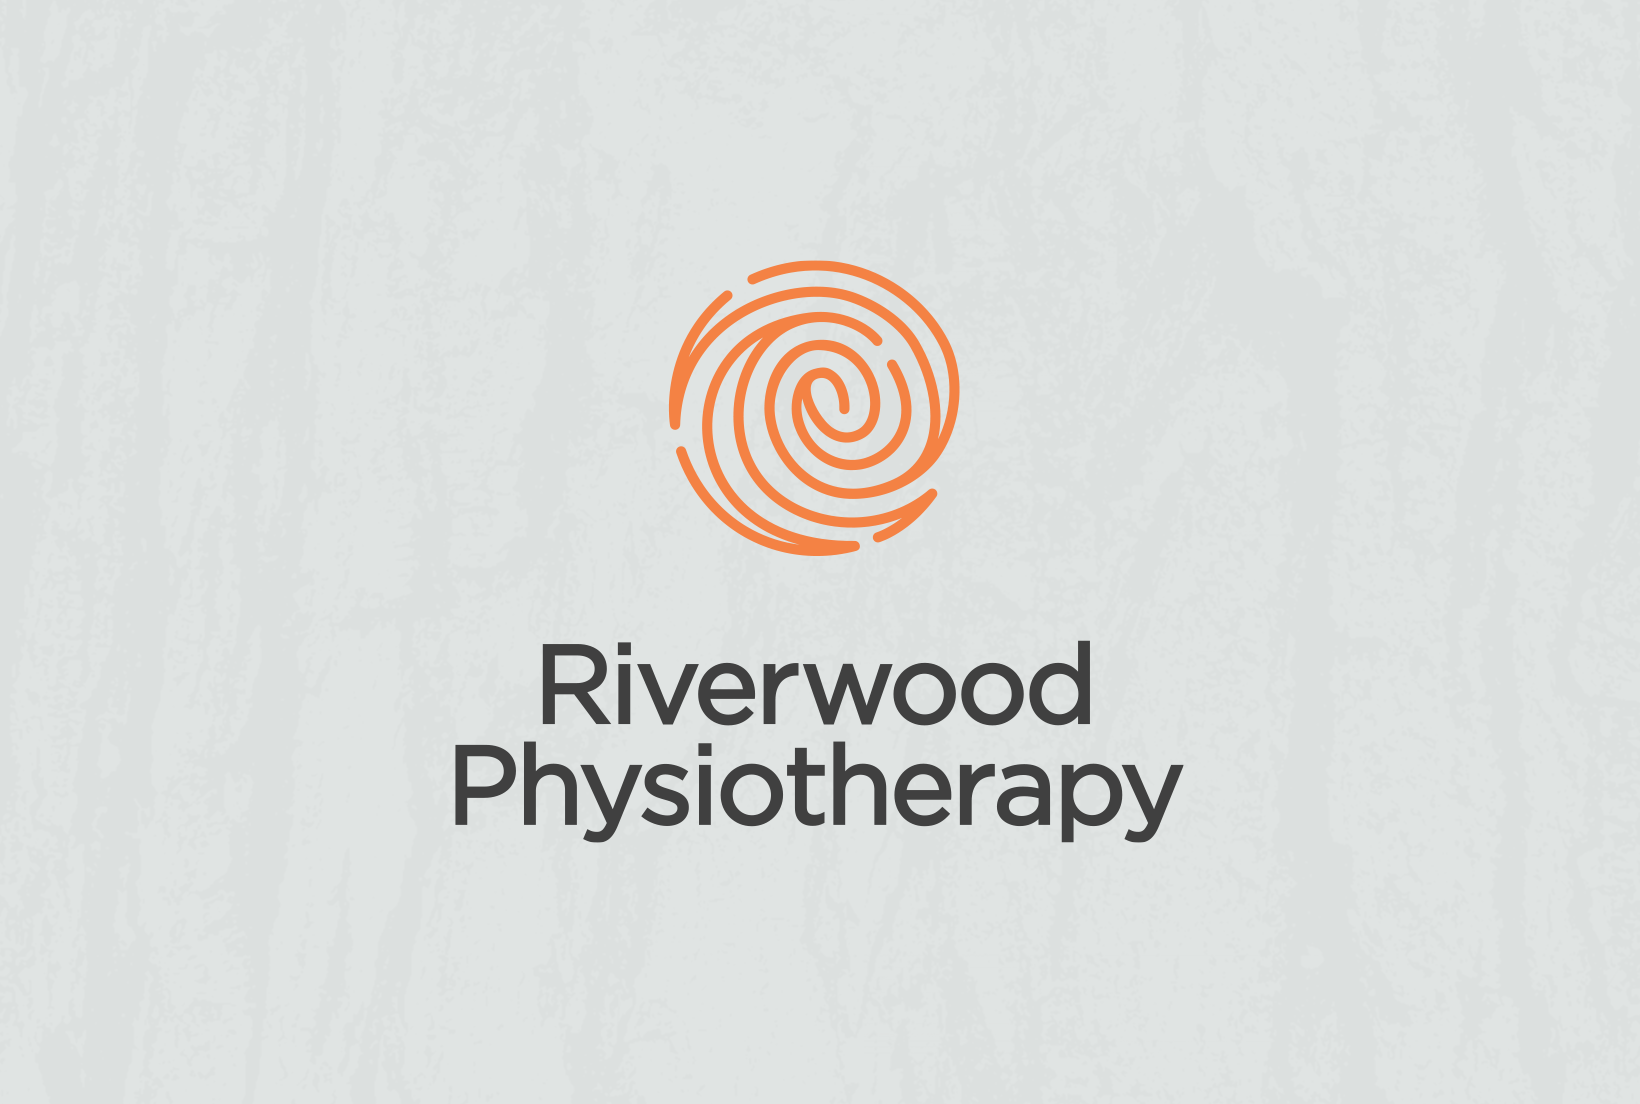 Riverwood Physiotherapy